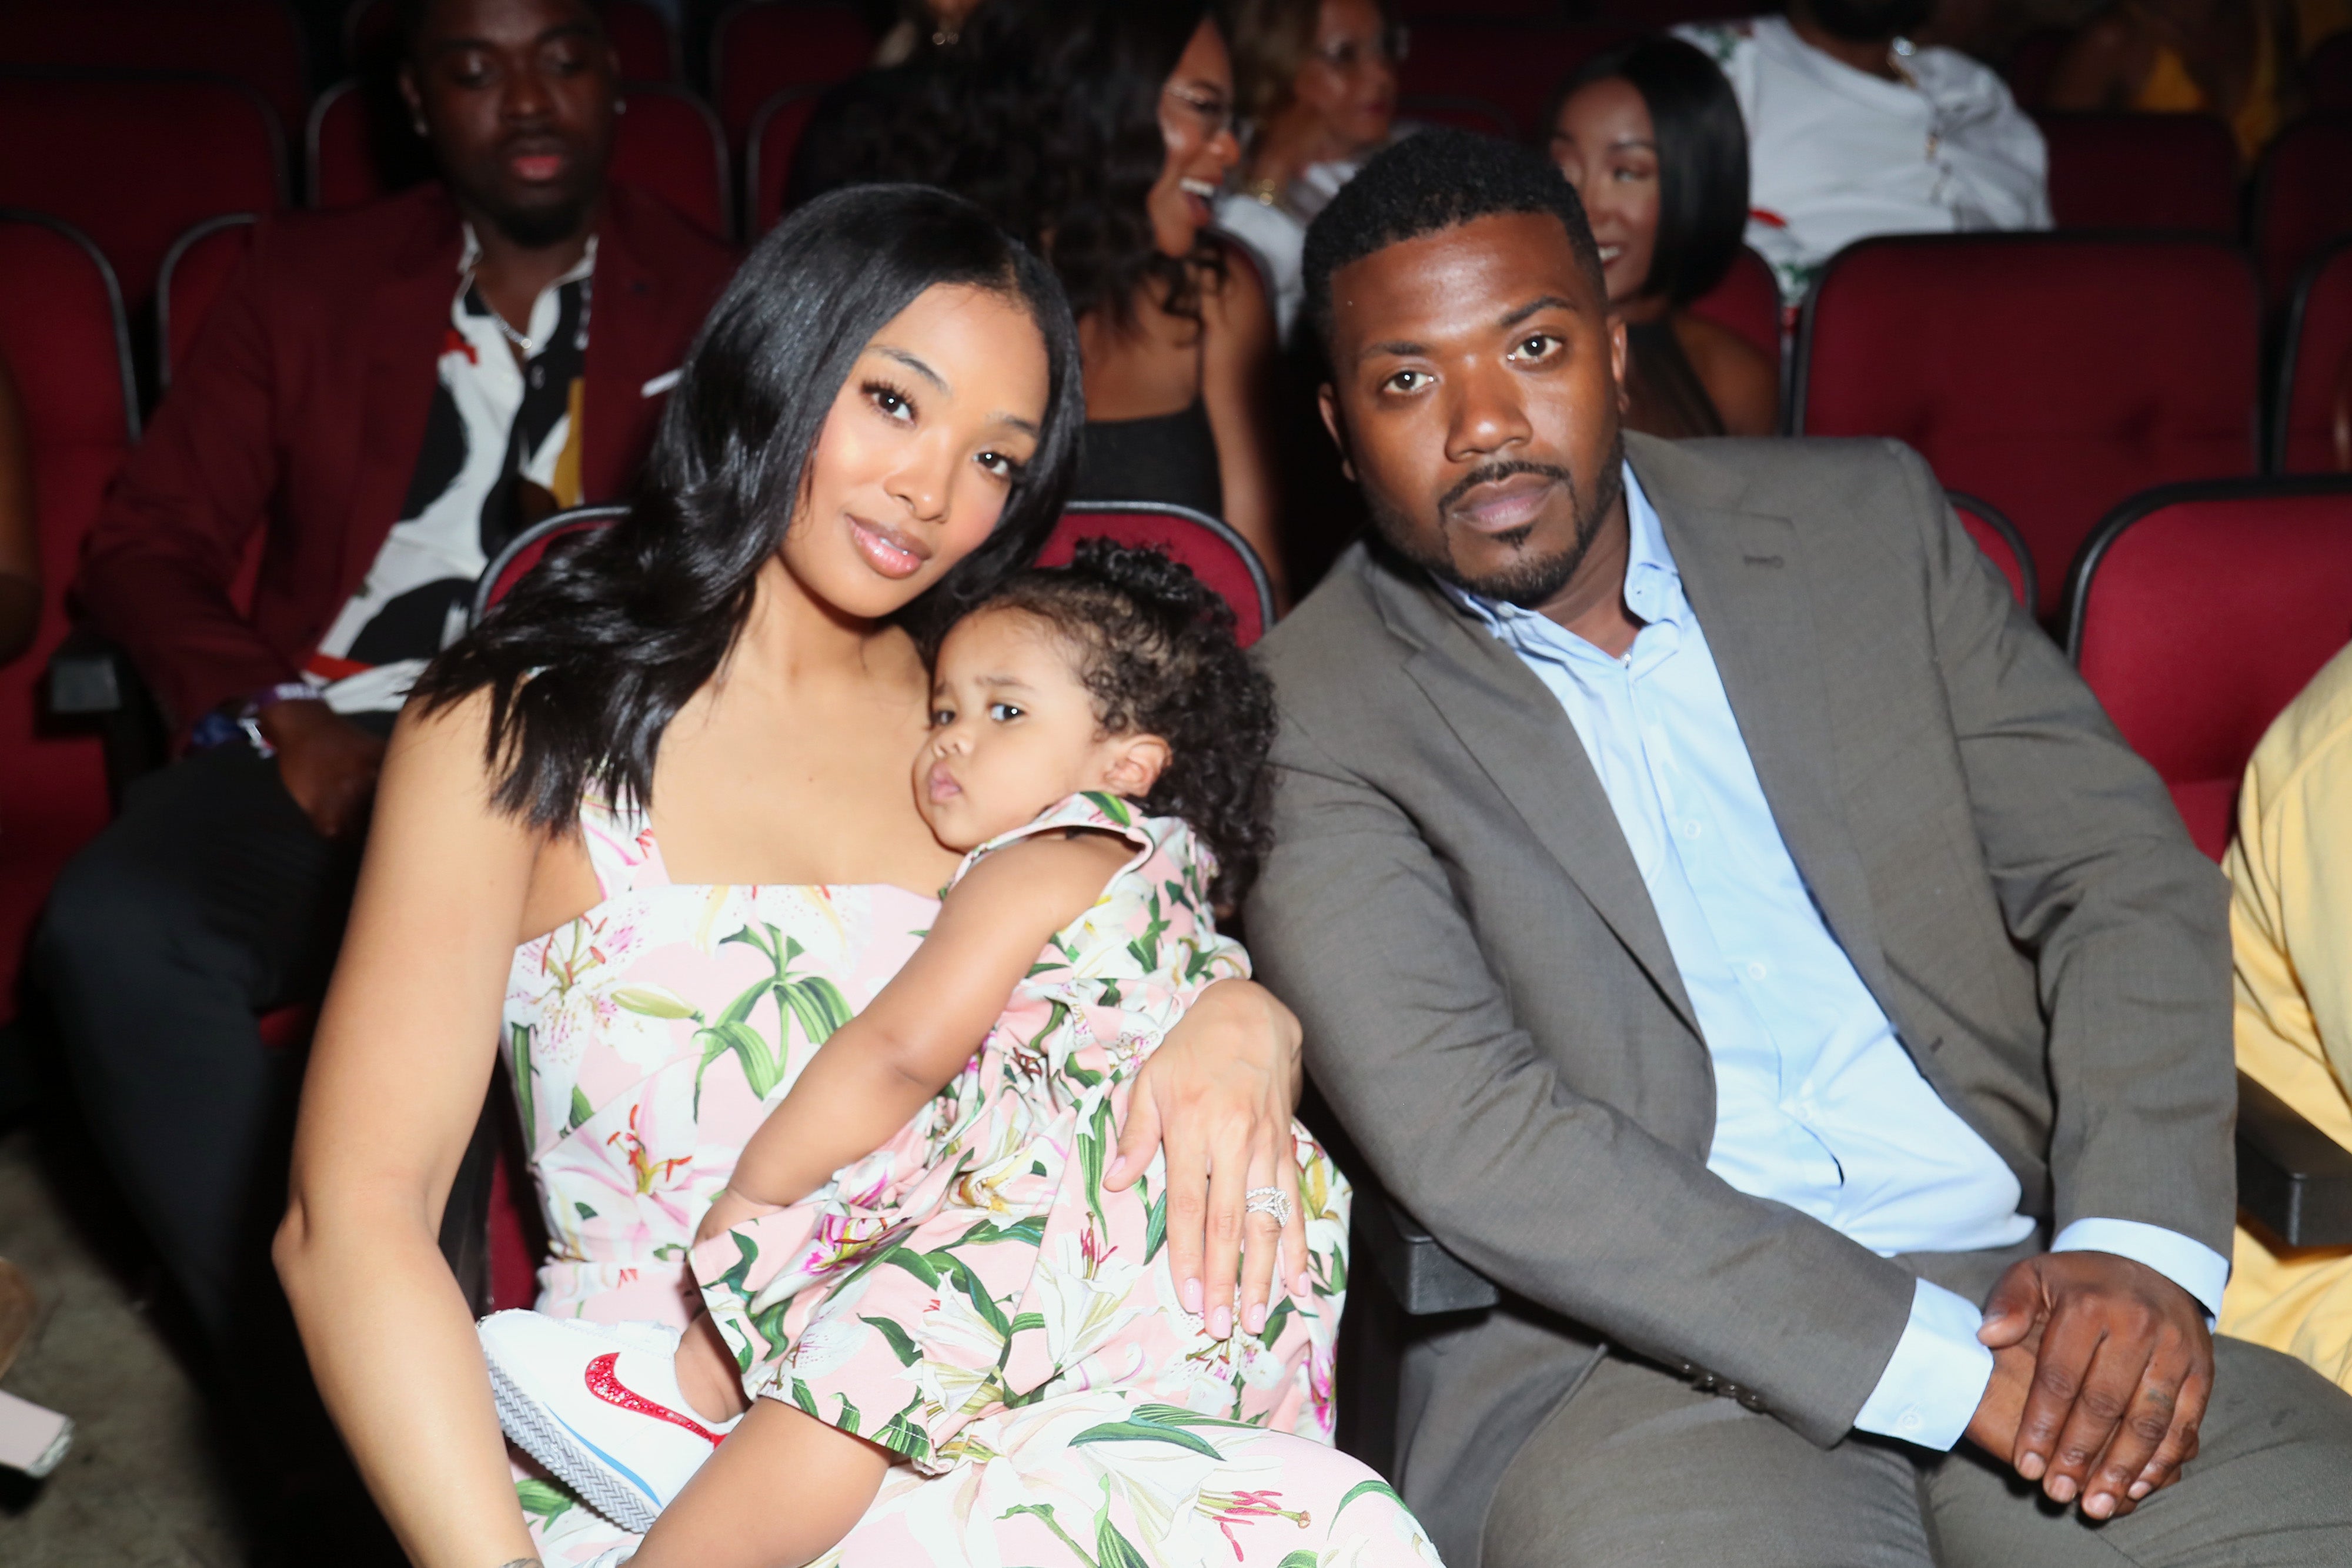 Ray J Steps Away From TB Tour To Focus On Second Child